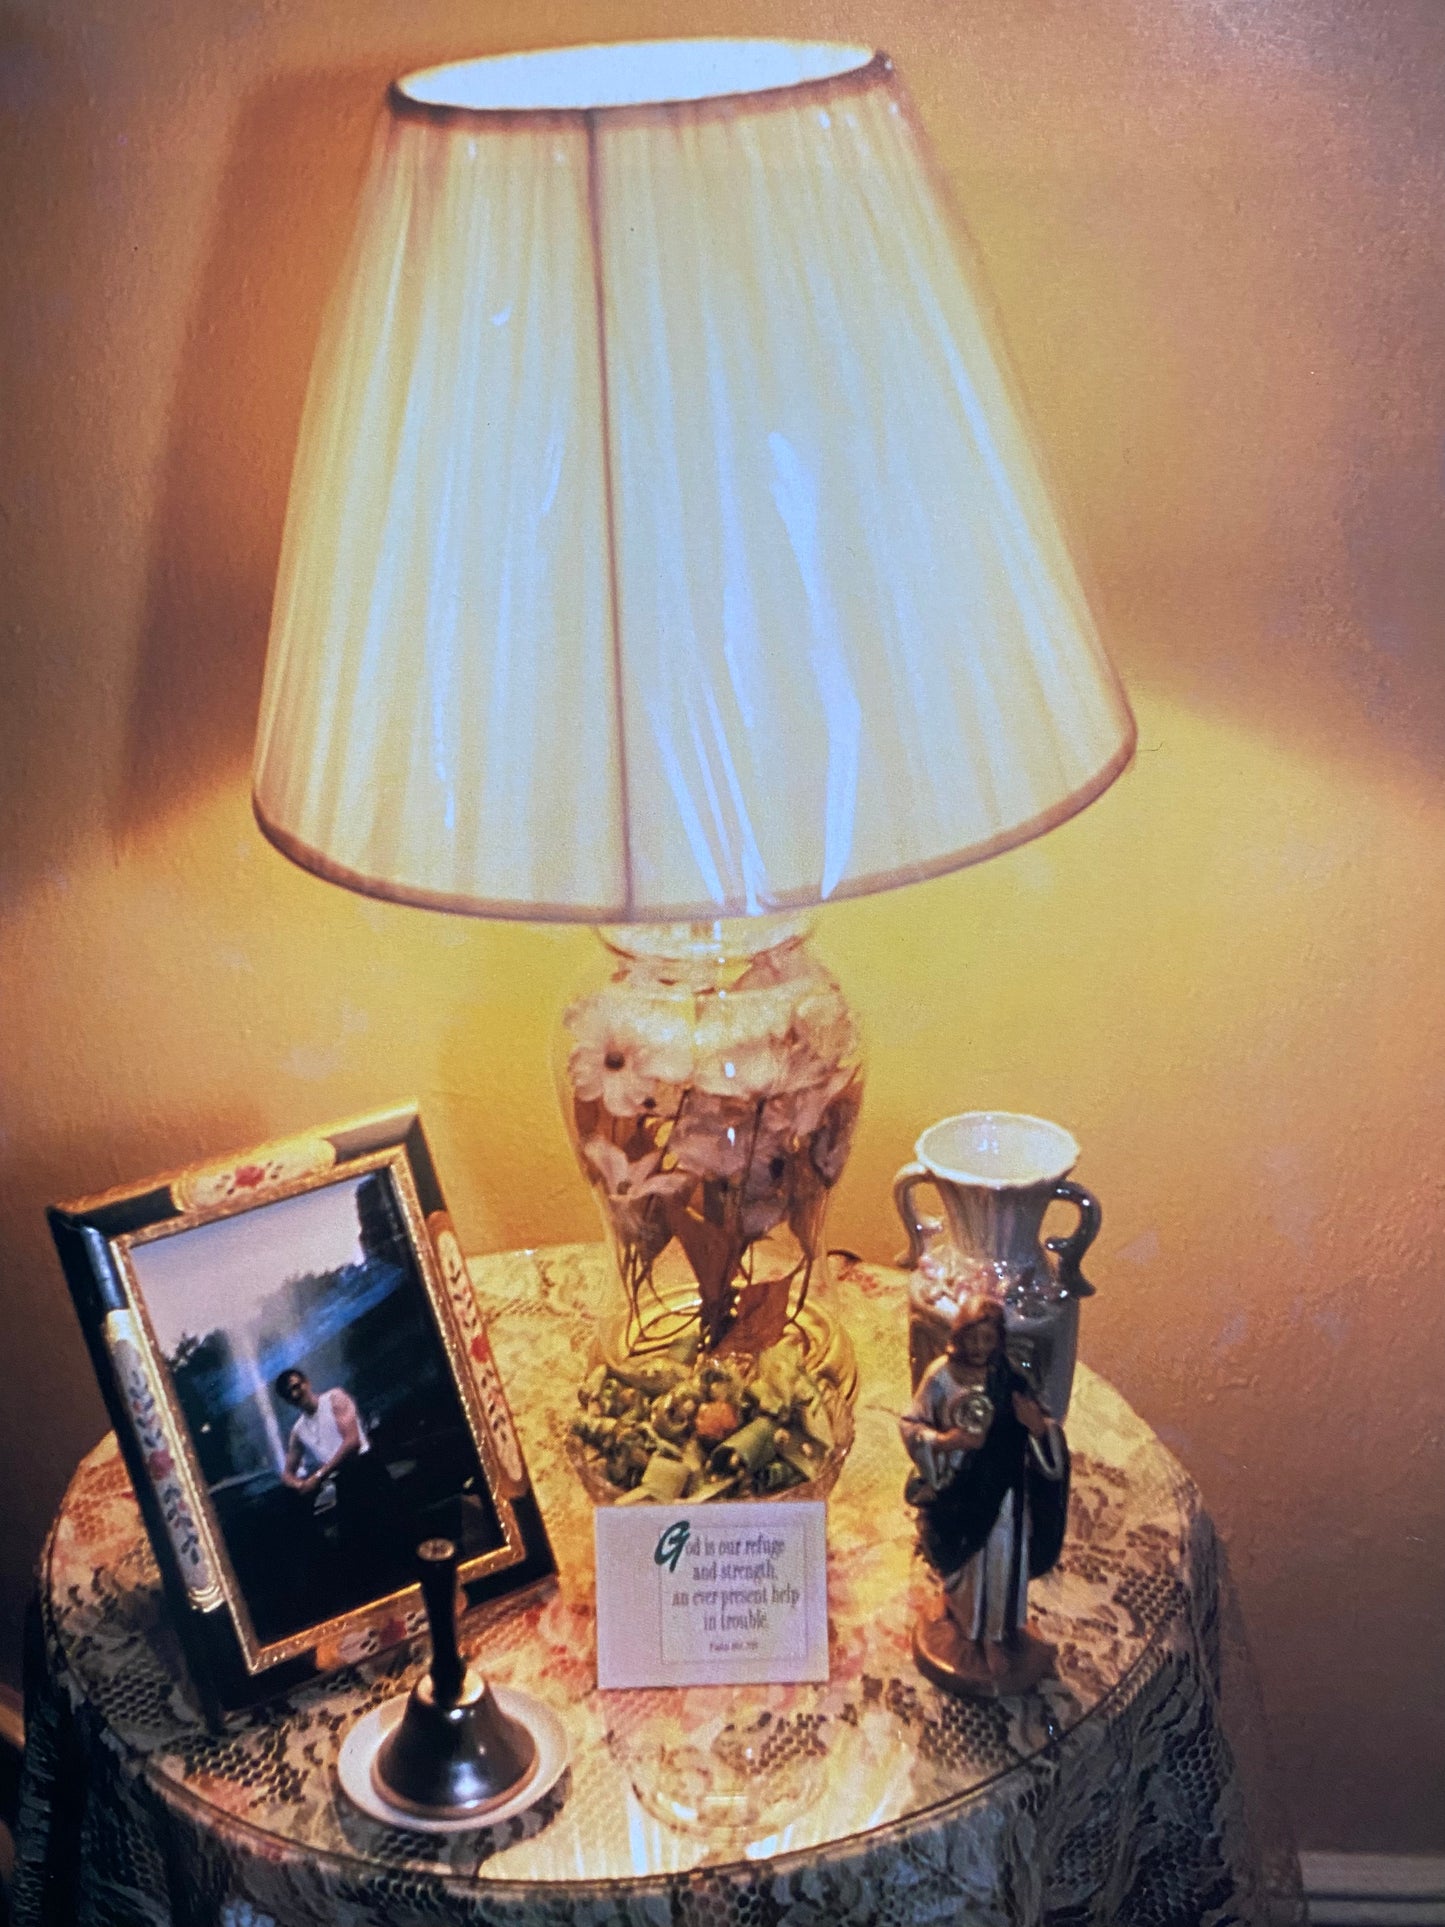 Hospice: A Photographic Enquiry (2000)